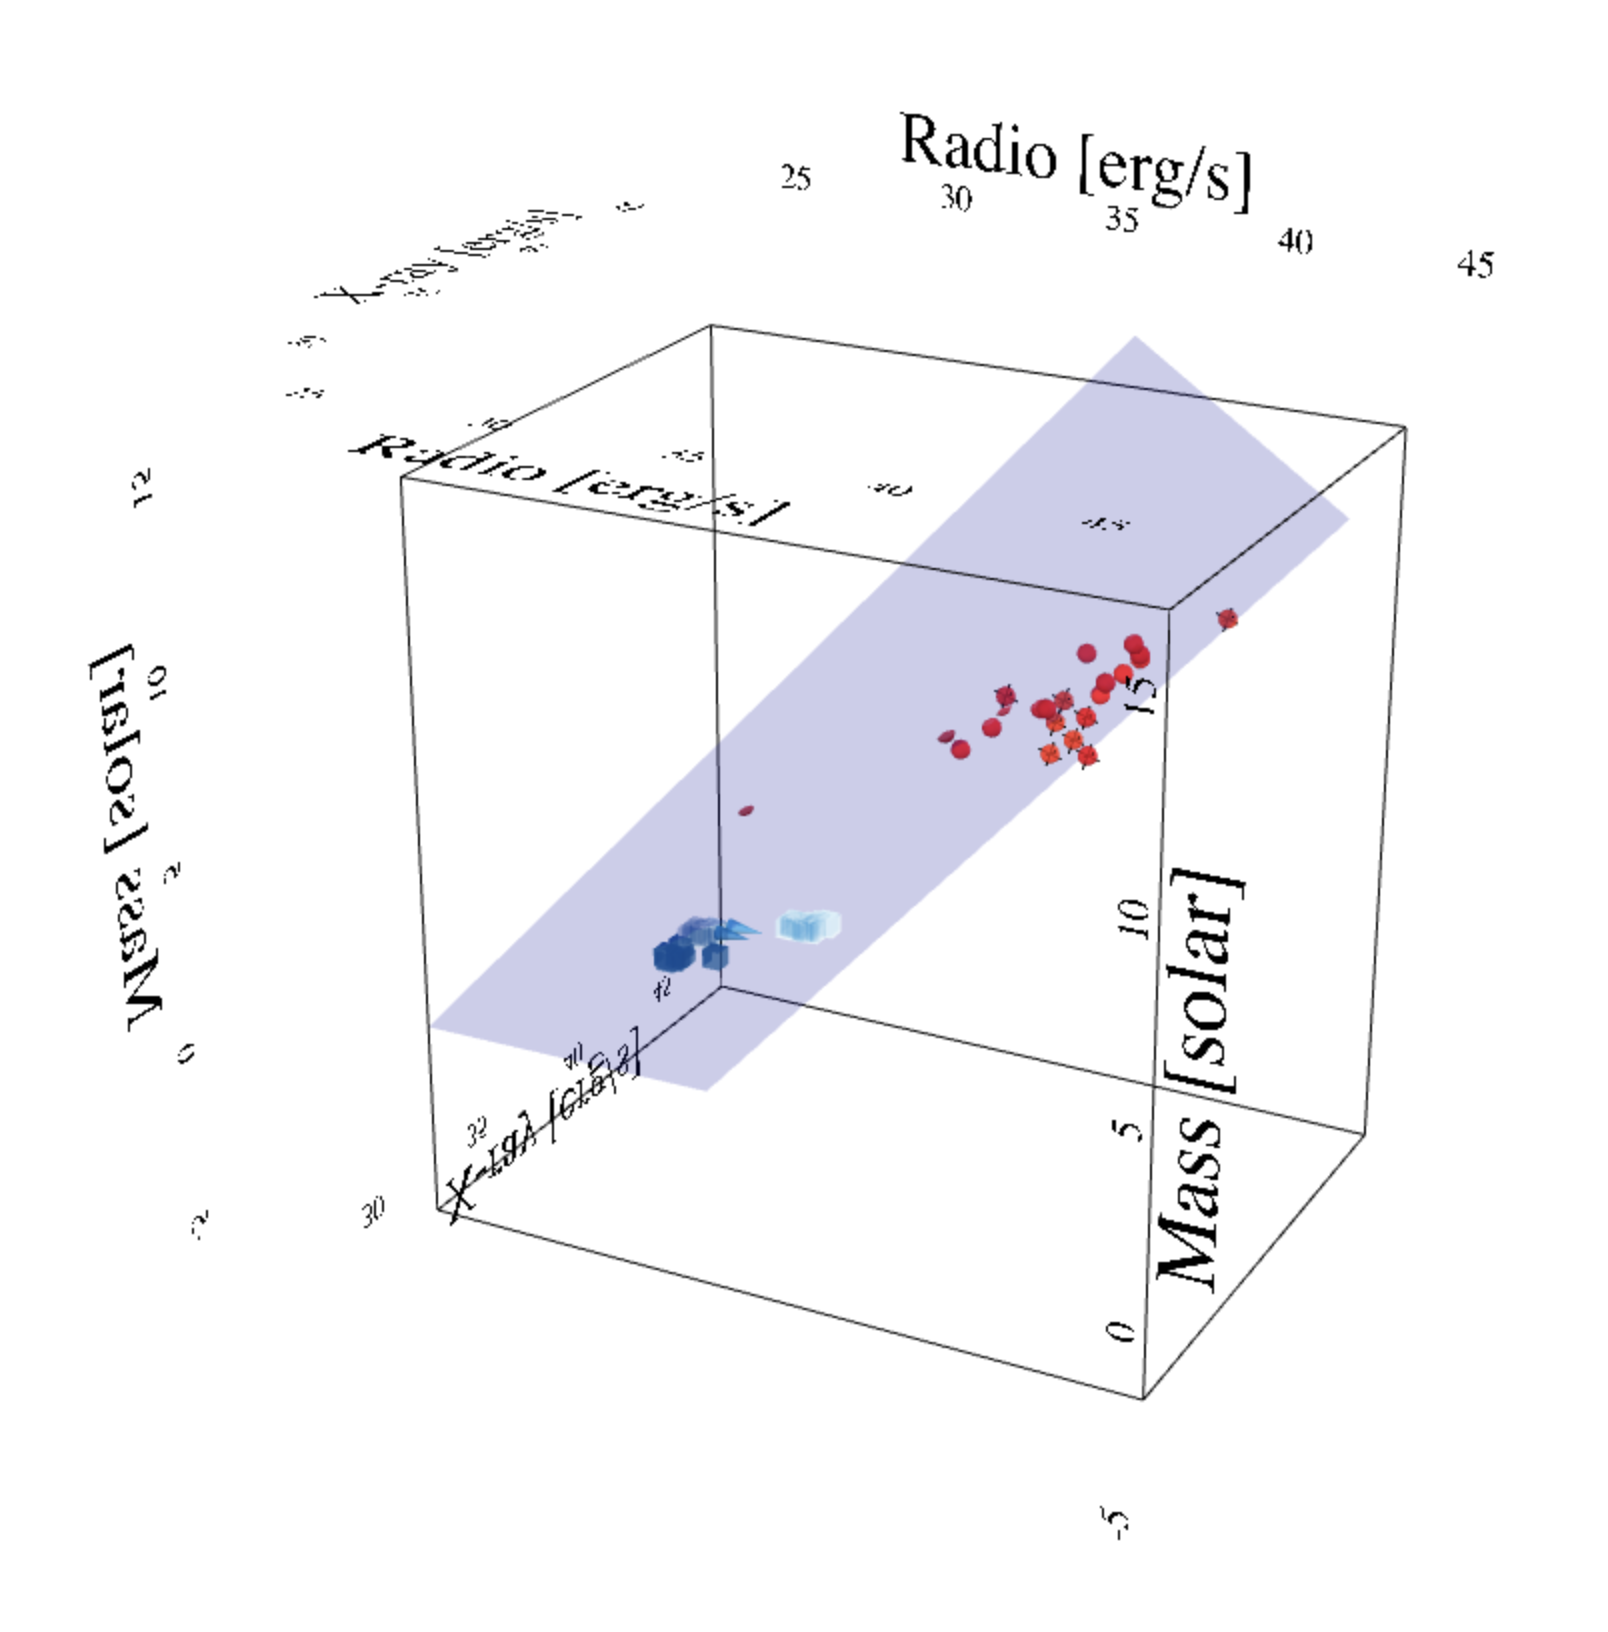 Three-dimensional view of fundamental plane of black hole accretion. A cube is labeled with the following orthogonal axes and limits. X-axis: Radio [erg/s] 30–45; Y-axis: X-ray [erg/s] 30–45; Z-axis: Mass [solar] 0–15. A light blue plane cuts through data points which are clustered as red spheres at the high-mass end and blue cubes and cones at the low mass end.